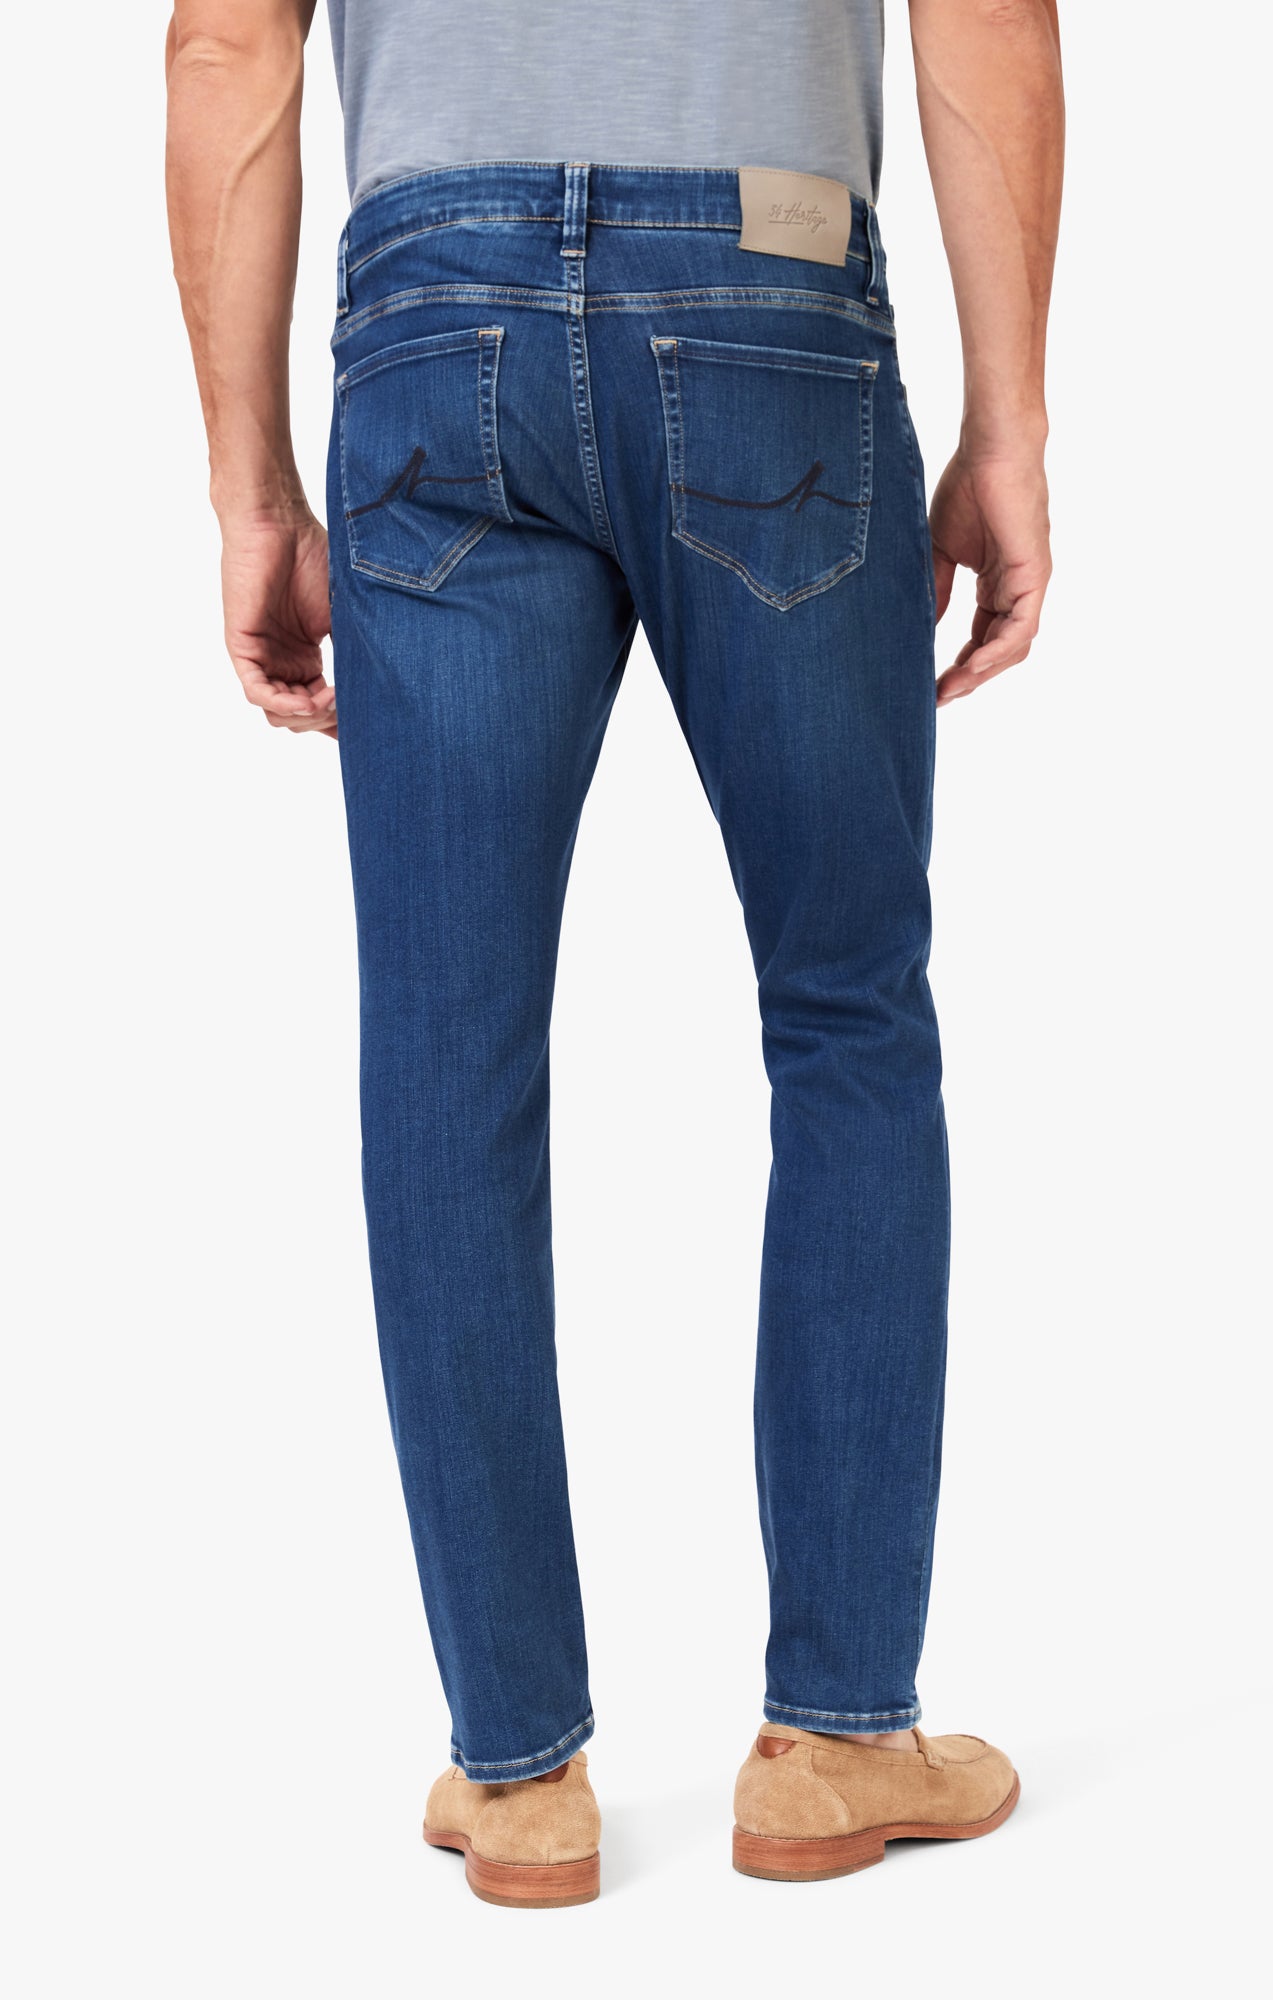 Courage Straight Leg Jeans In Ocean Refined